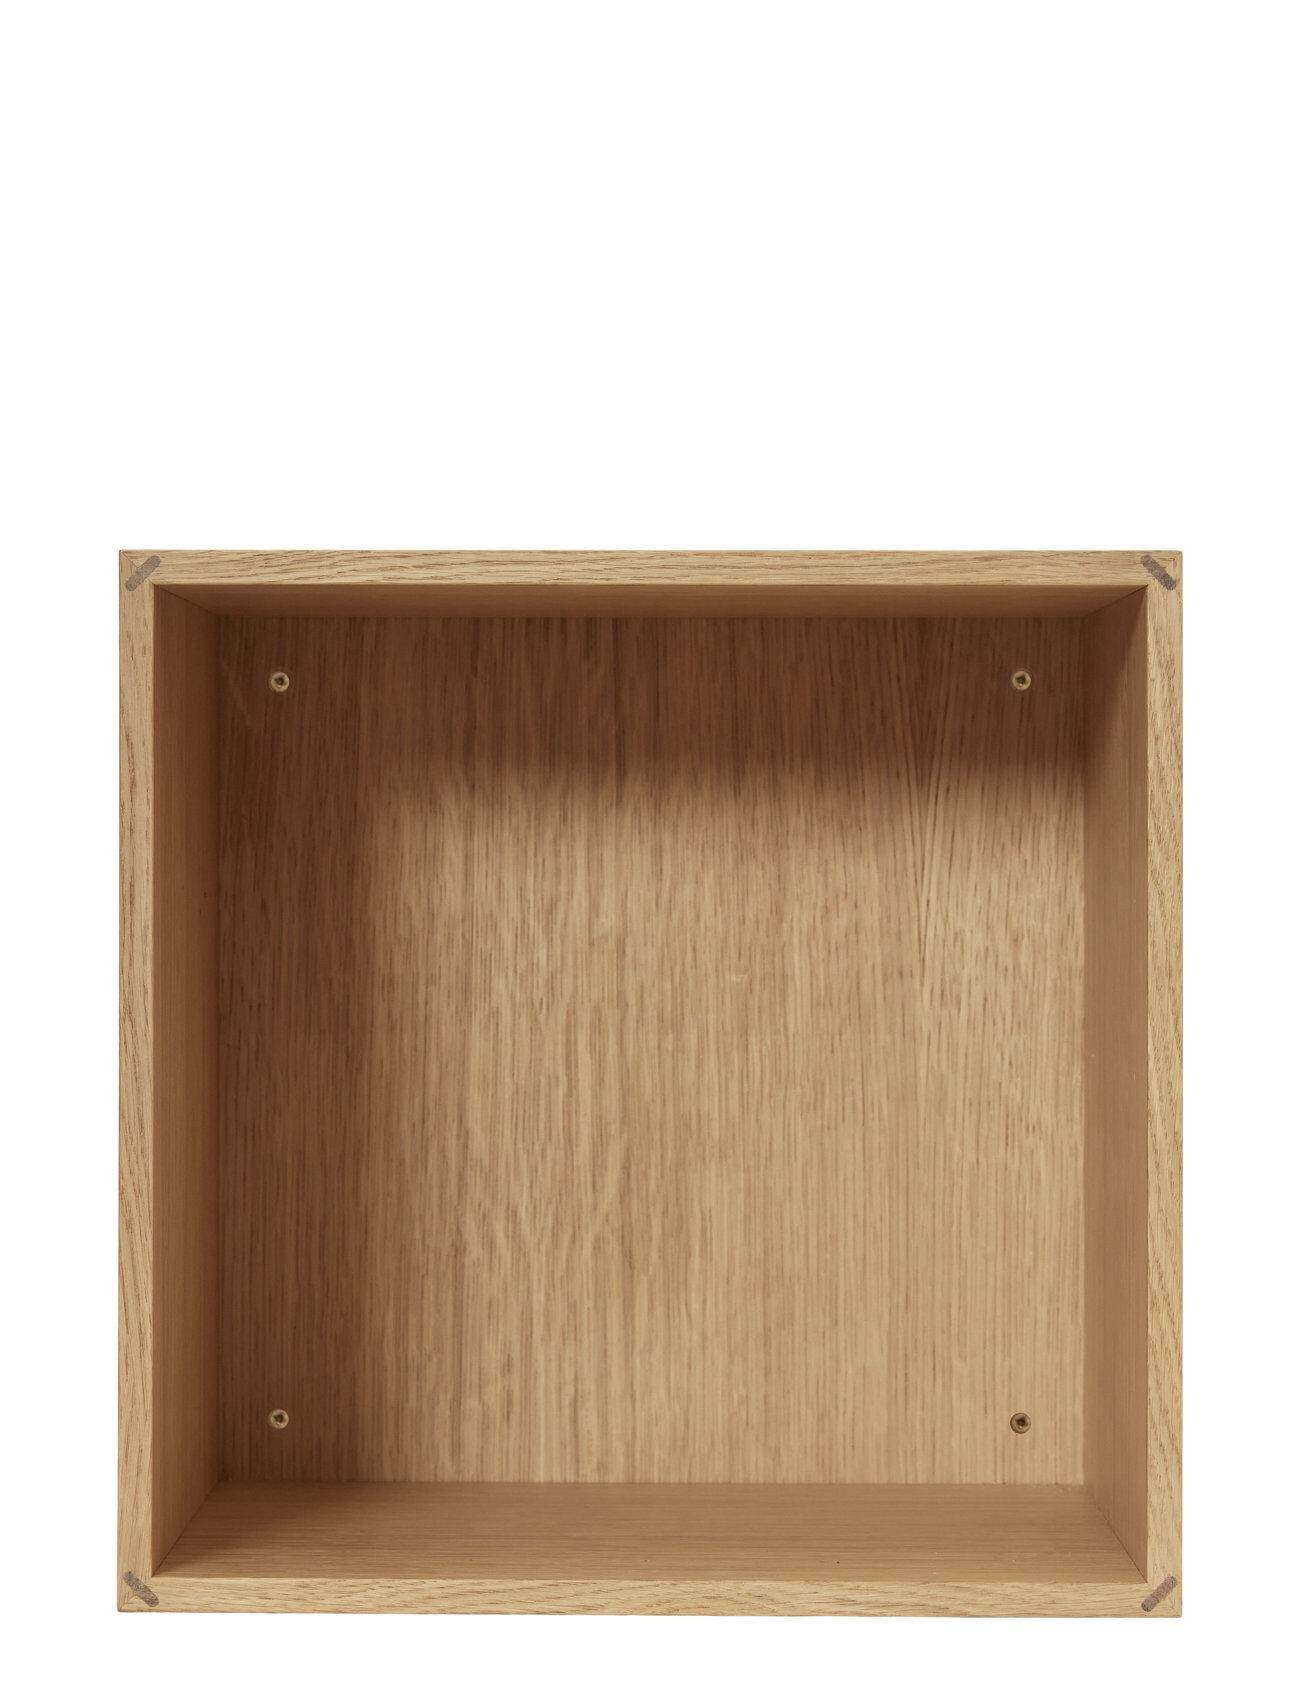 Andersen Furniture S10 Signature Module Without Door Home Furniture Shelves Brun Andersen Furniture